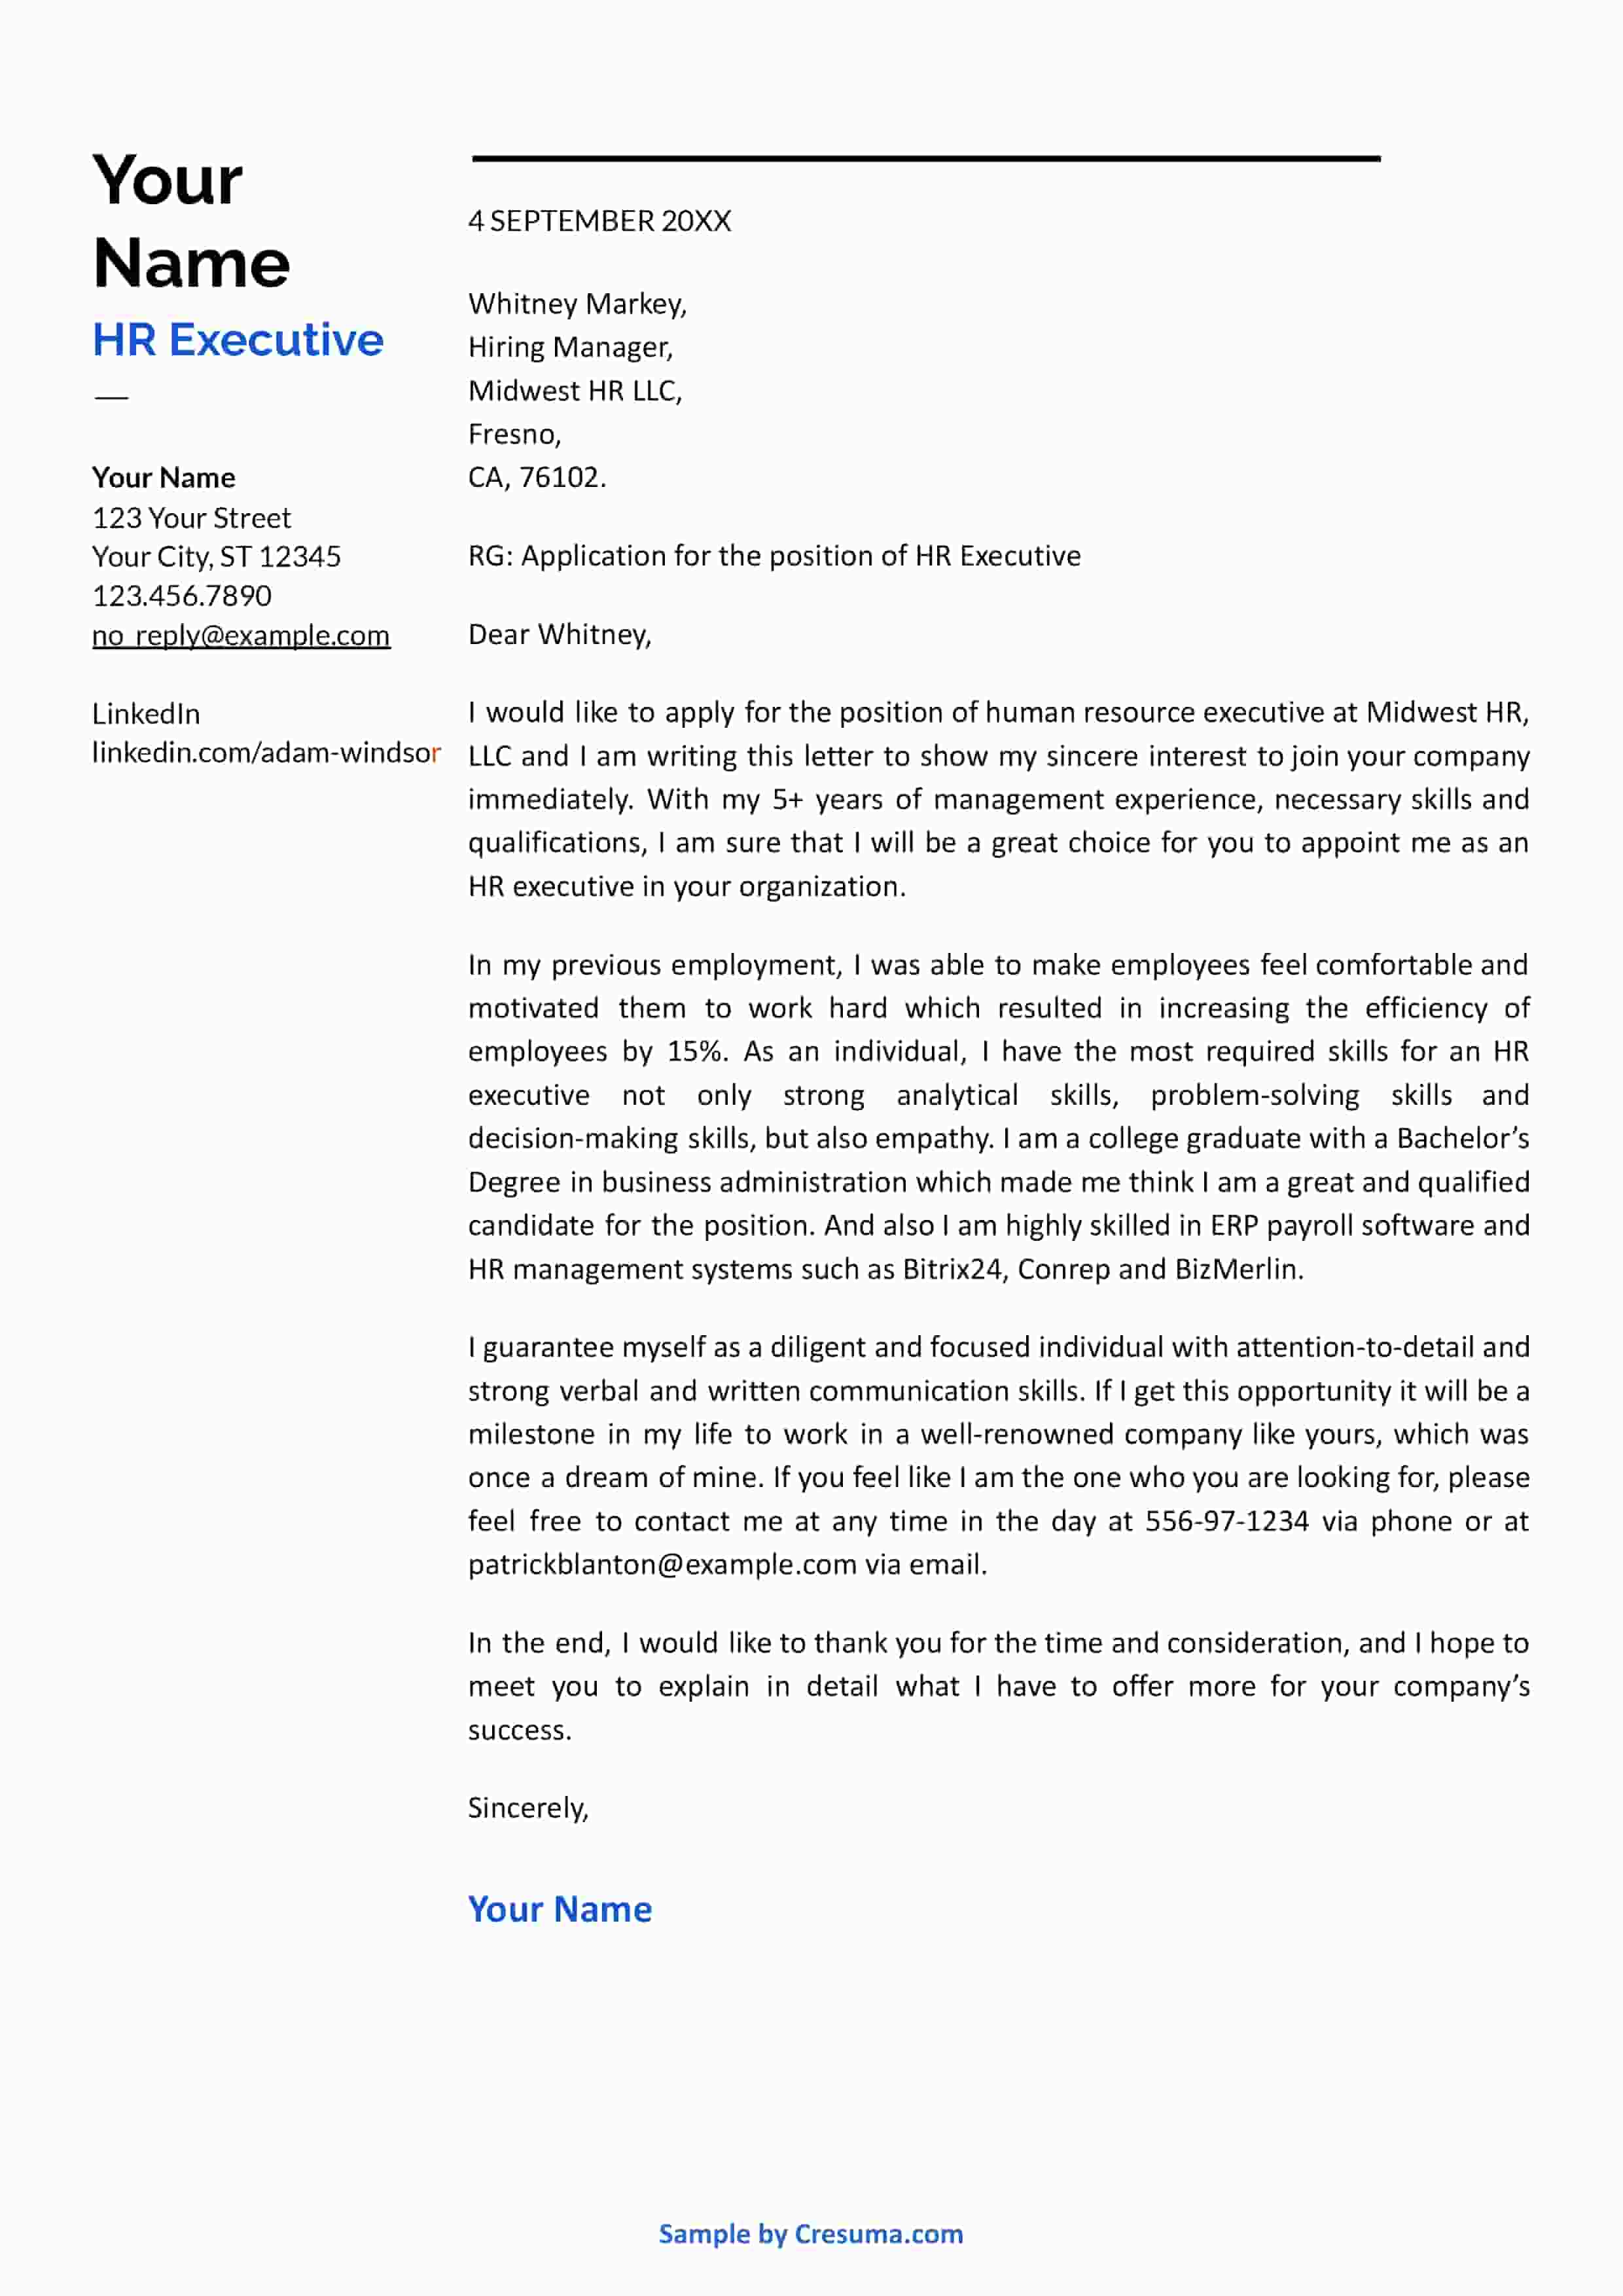 HR executive cover letter sample template 5